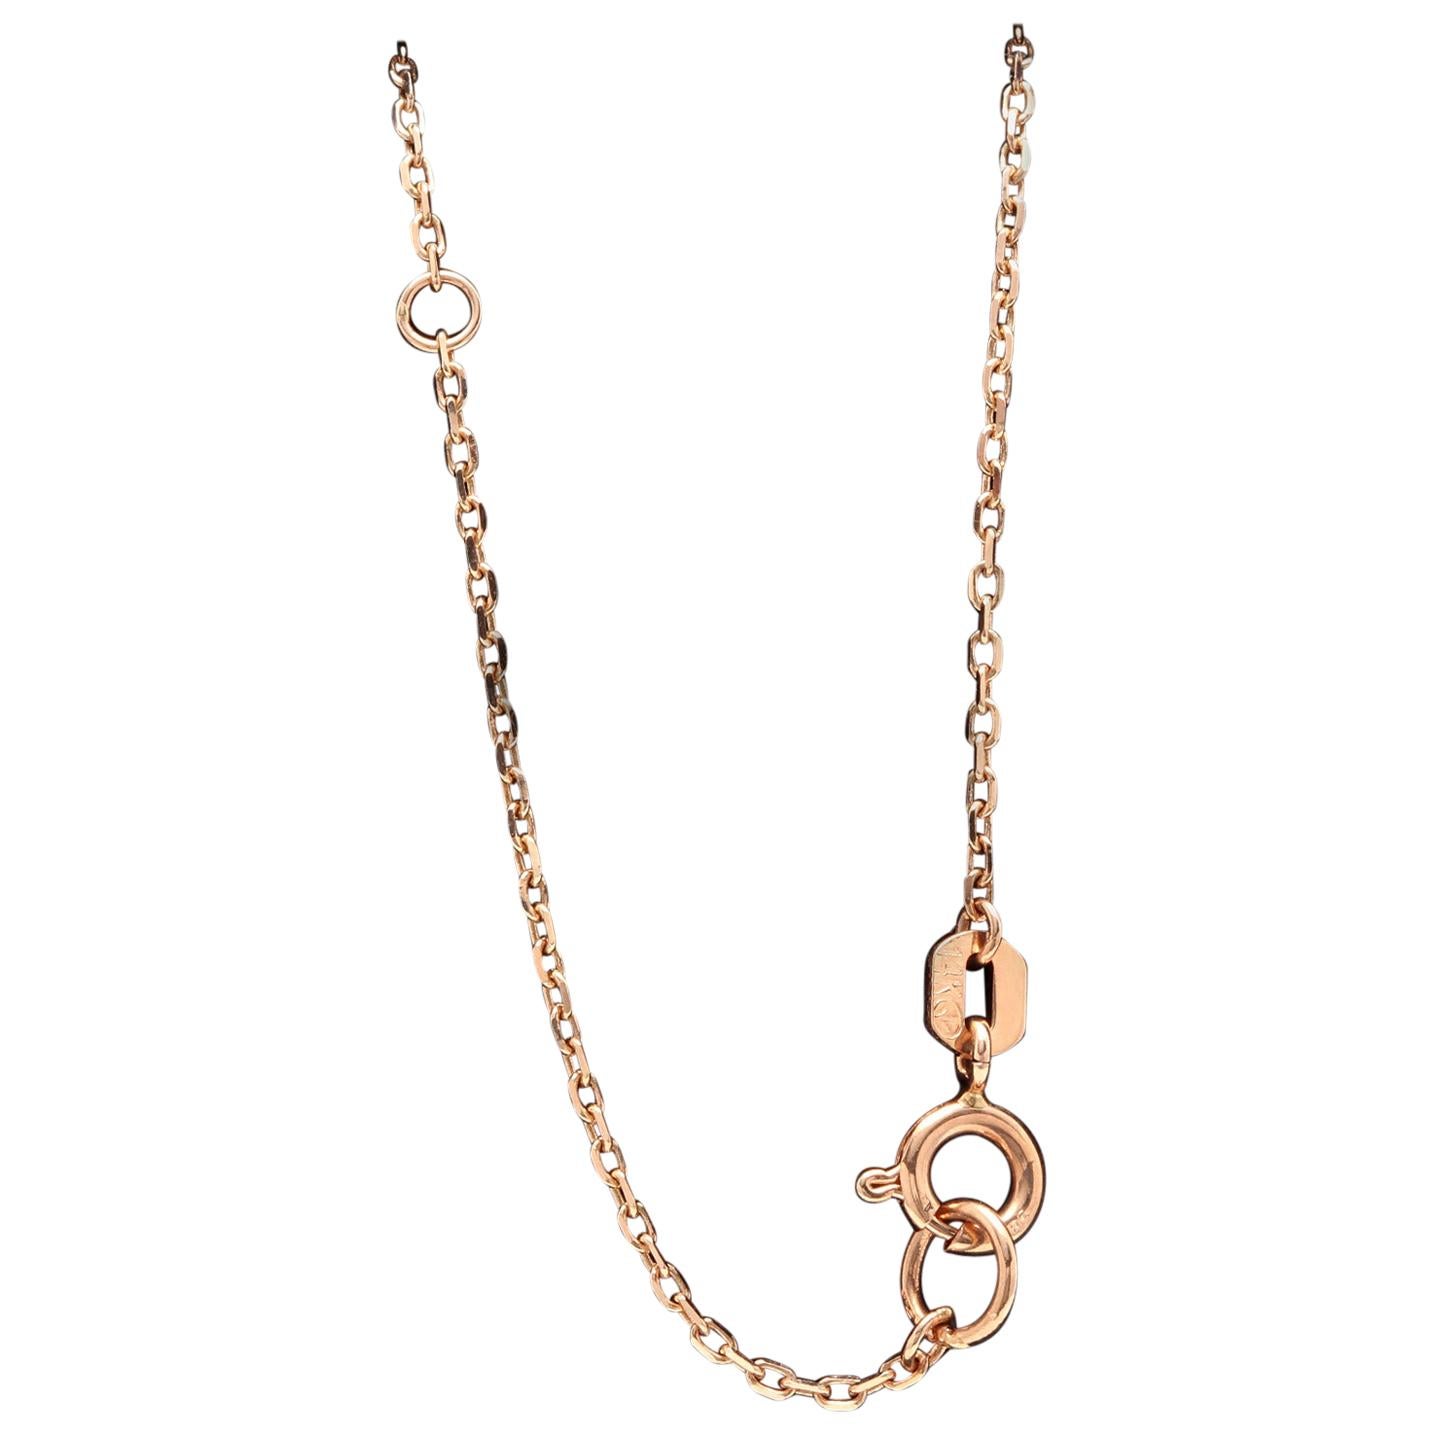 0.25Ct Splendid 14K Solid Rose Gold Cross Necklace

Amazing looking piece!

Stamped: 14k Total Natural Round Diamond Weight is Approx. 0.25 Carats (G-H / SI1-SI2)

Chain Length is: 16 inches (can adjusted to 14